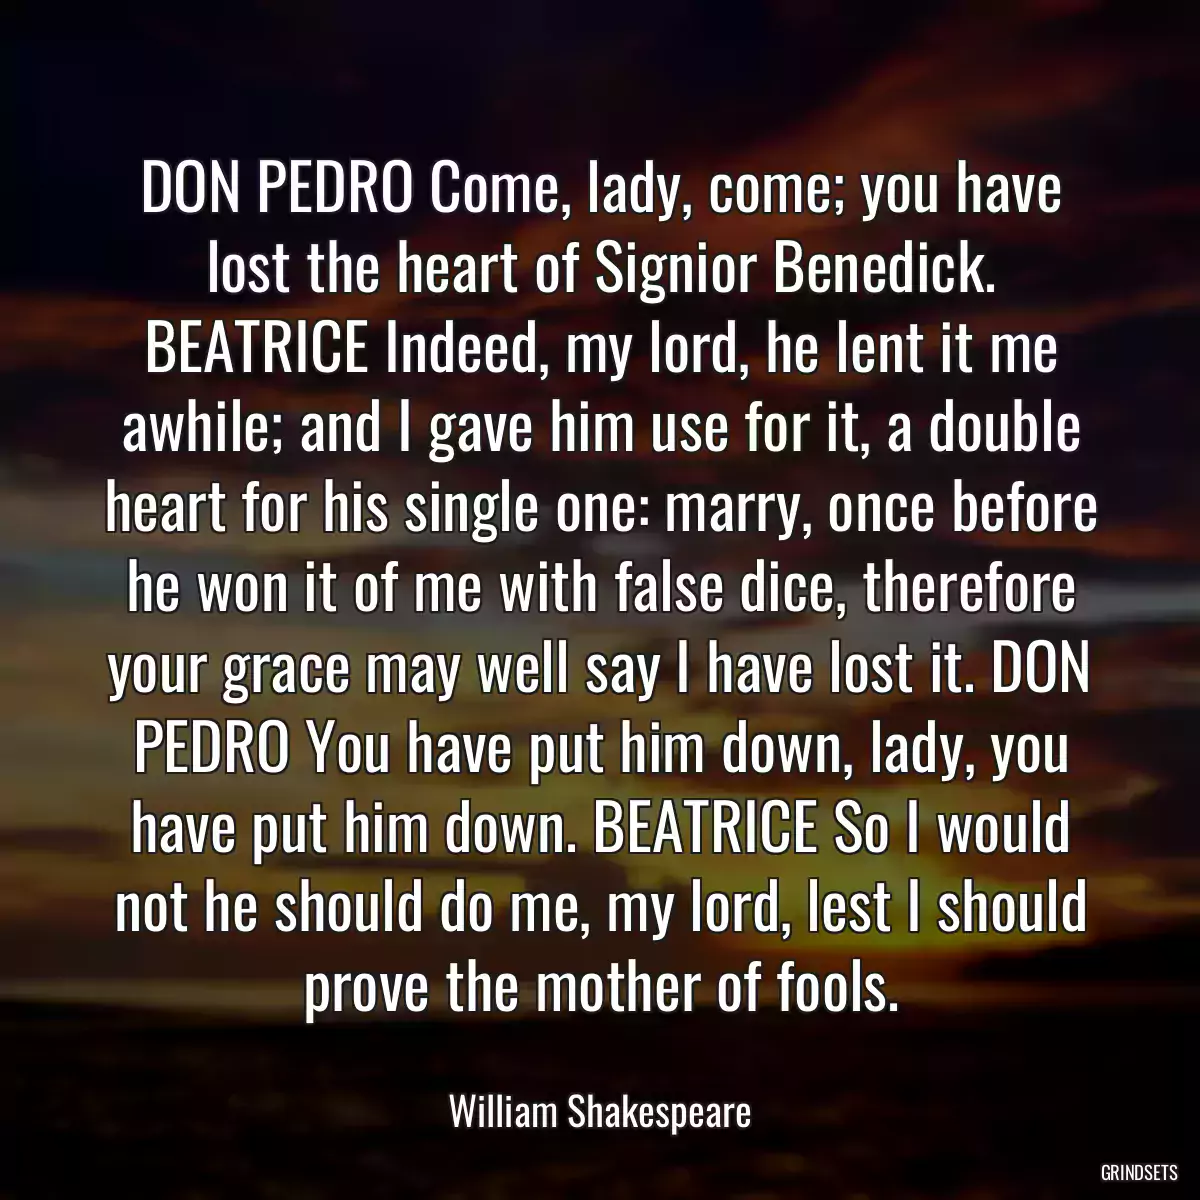 DON PEDRO Come, lady, come; you have lost the heart of Signior Benedick. BEATRICE Indeed, my lord, he lent it me awhile; and I gave him use for it, a double heart for his single one: marry, once before he won it of me with false dice, therefore your grace may well say I have lost it. DON PEDRO You have put him down, lady, you have put him down. BEATRICE So I would not he should do me, my lord, lest I should prove the mother of fools.